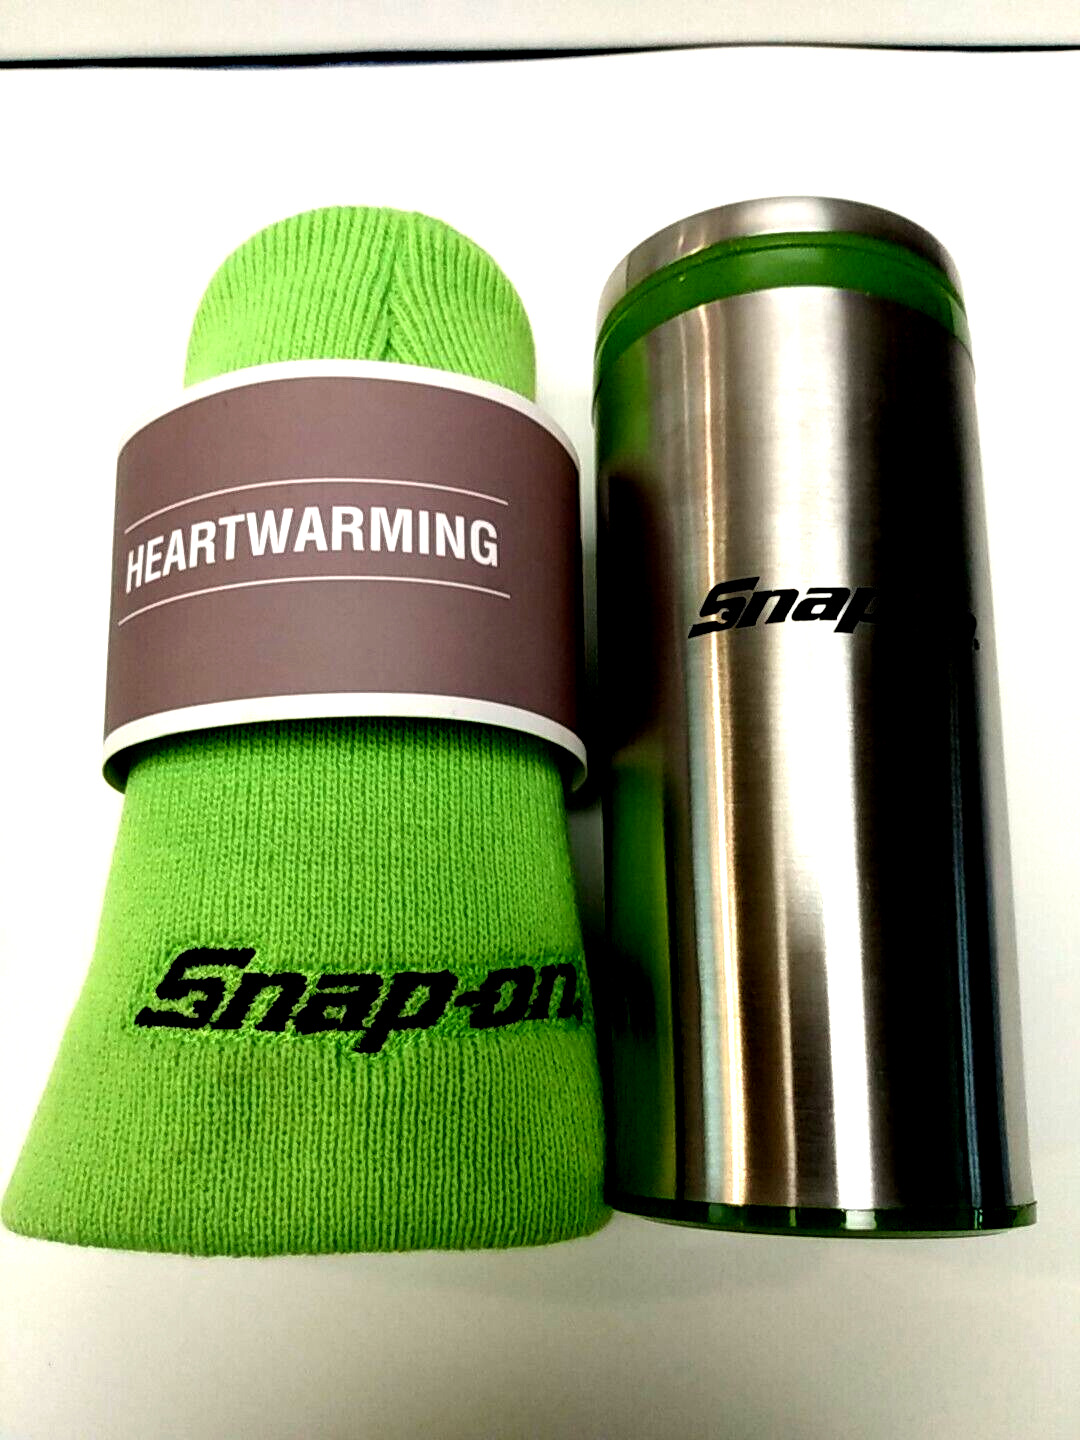 Snap-on Tools Travel Mug Stainless Steel With a winter Stocking hat Brand New